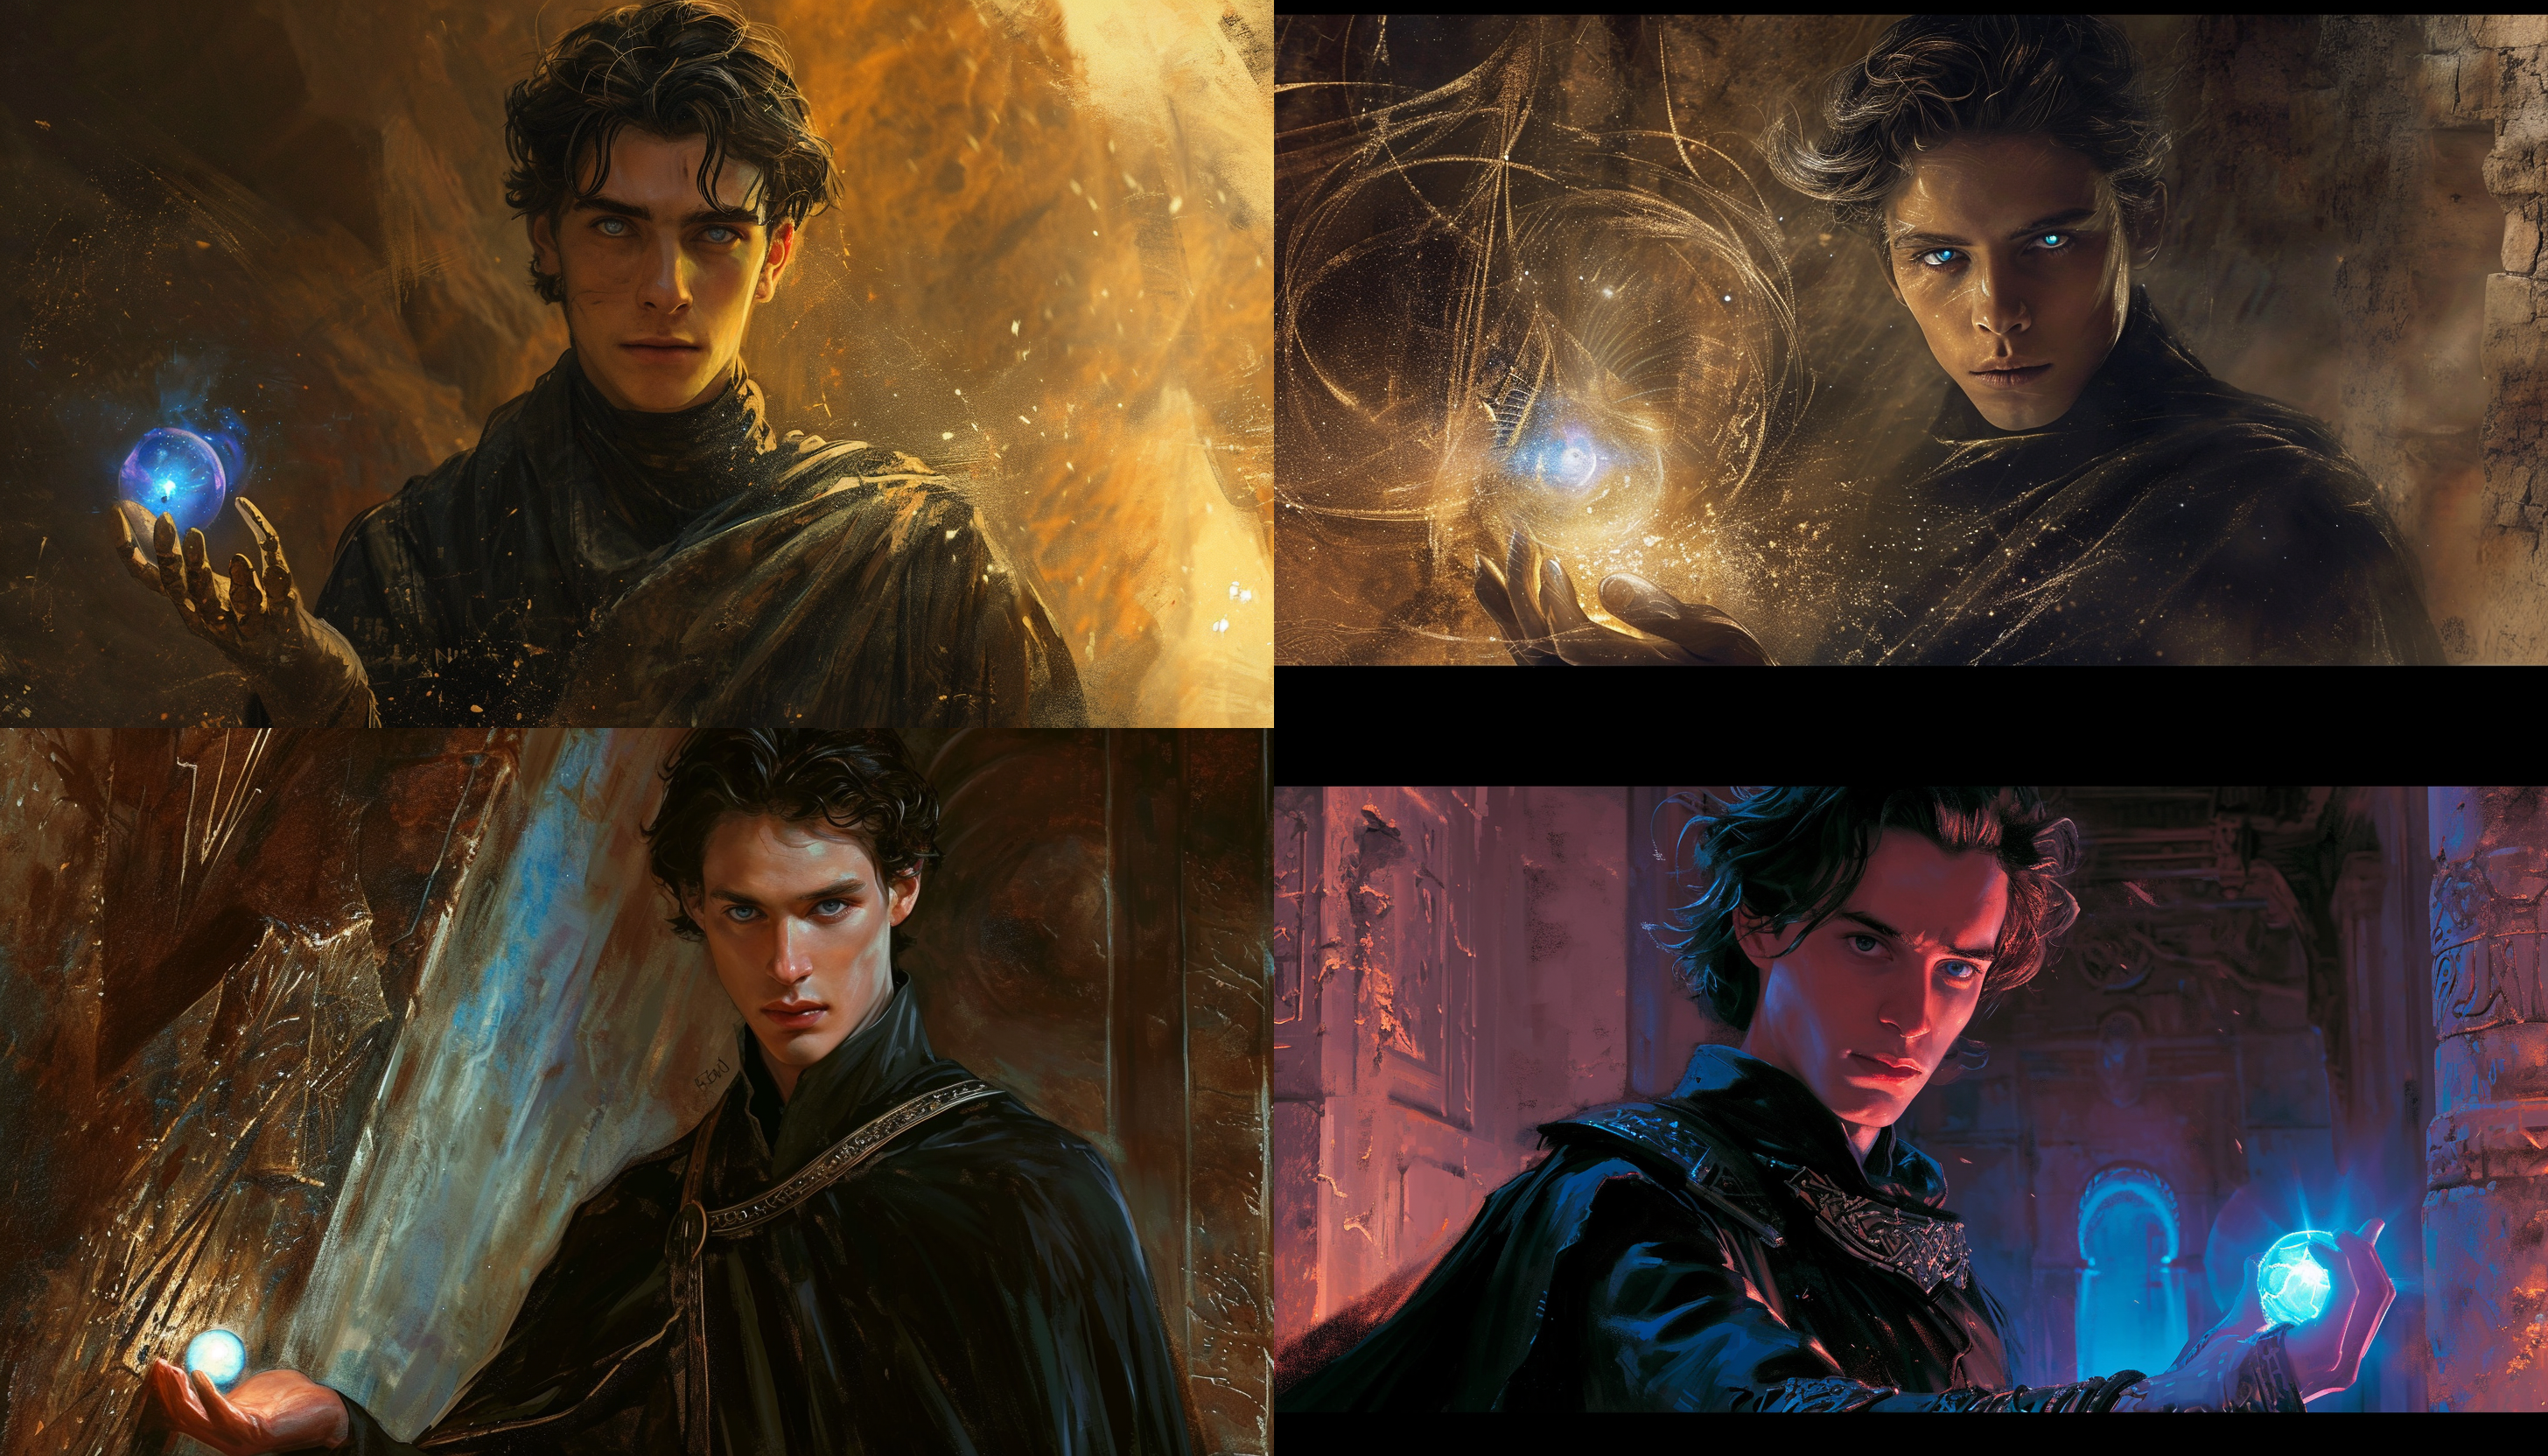 Paul Atreides’ visions and training with the Bene Gesserit